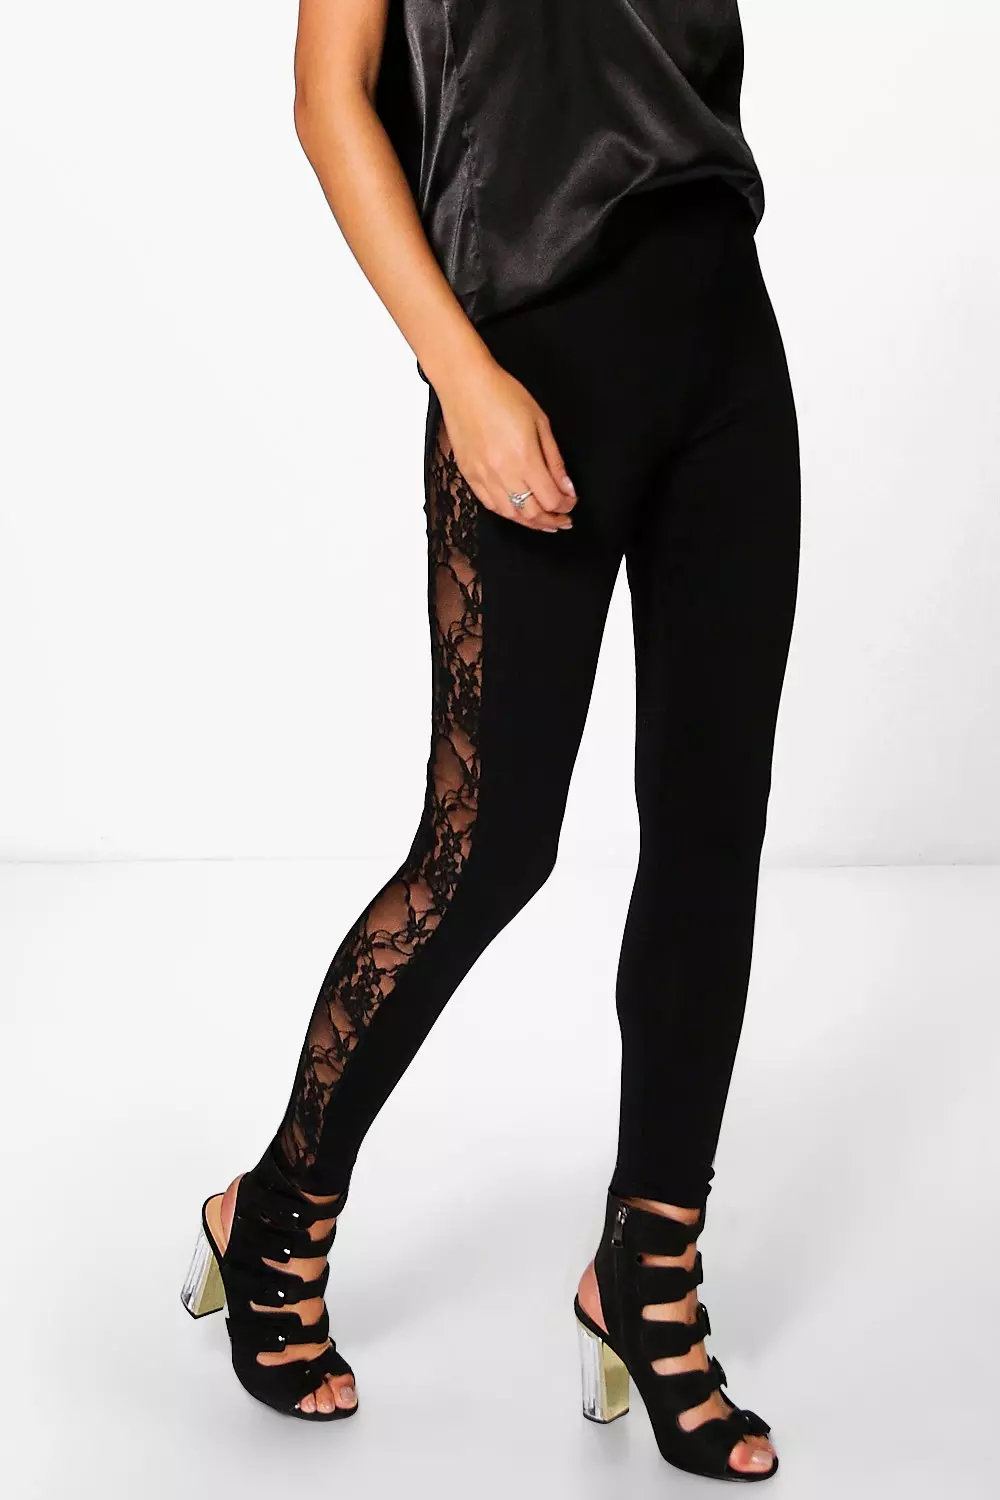 ASOS DESIGN lace panel tights